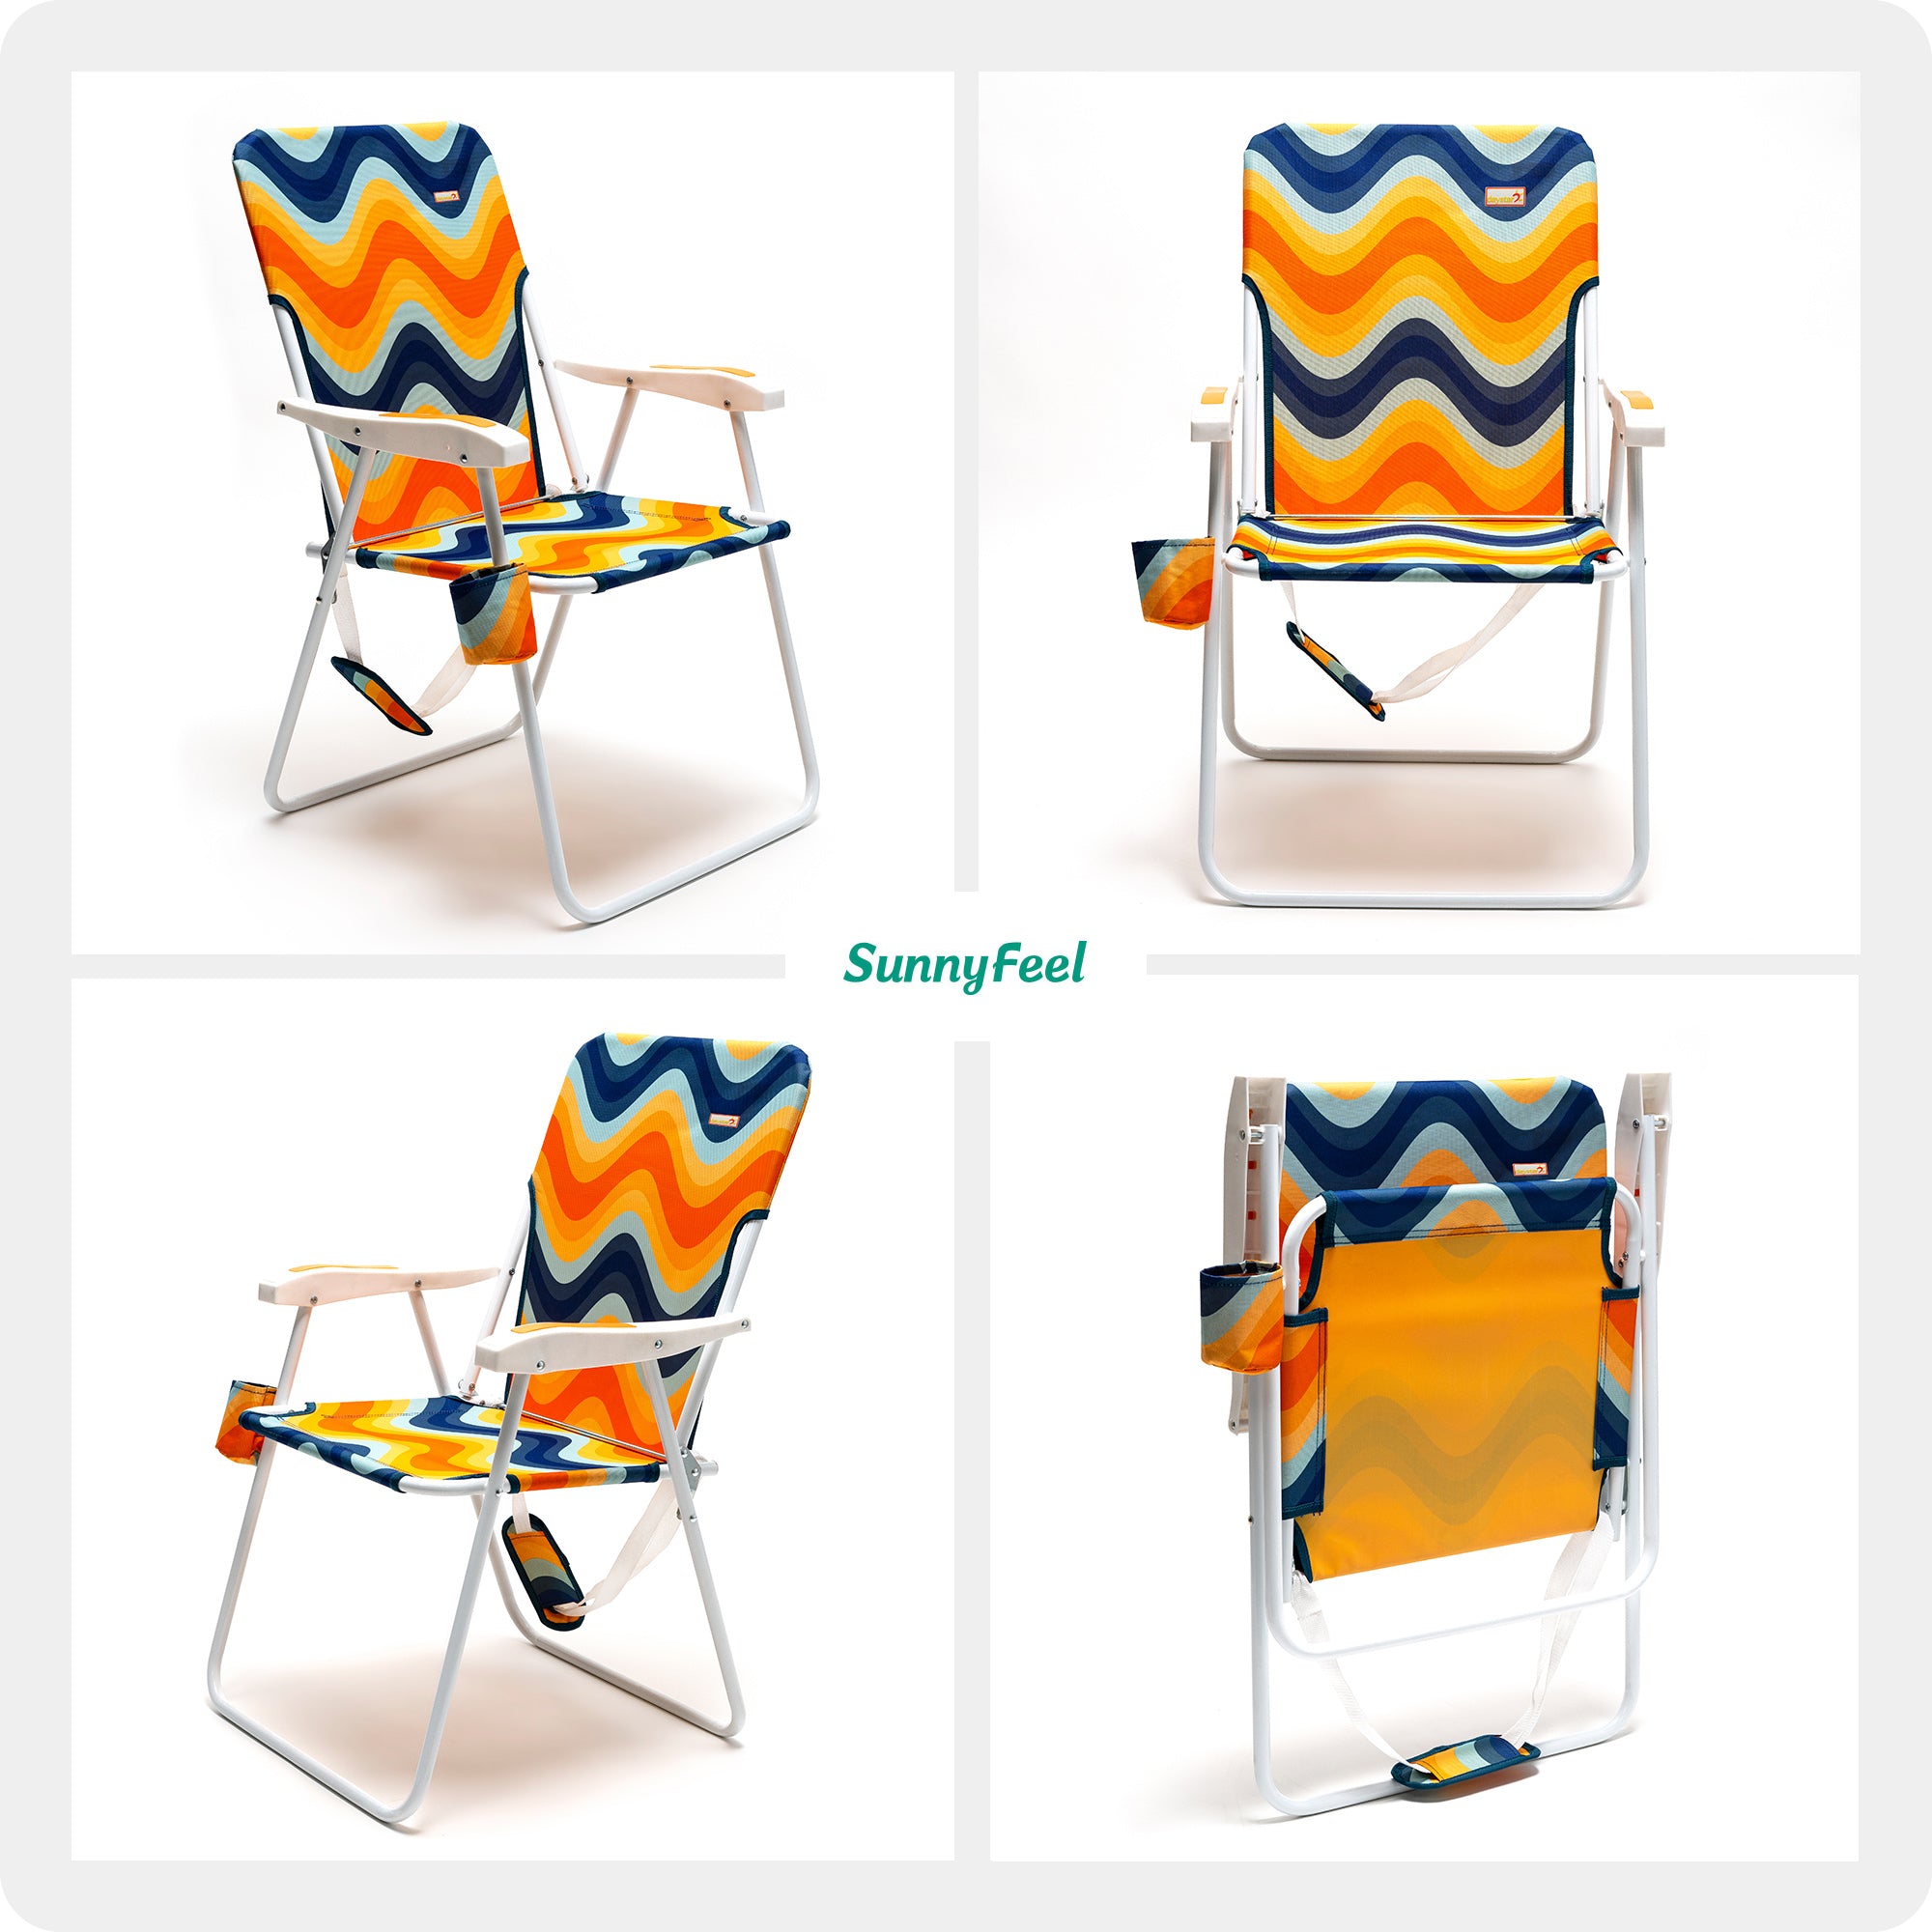 Tall Folding Beach Chair Lightweight, Portable High Sand Chair For Adults Heavy Duty 300 LBS With Cup Holders, Foldable Camping Lawn Chairs For Camping, Outdooring, Traveling, Picnic Concert,Sports